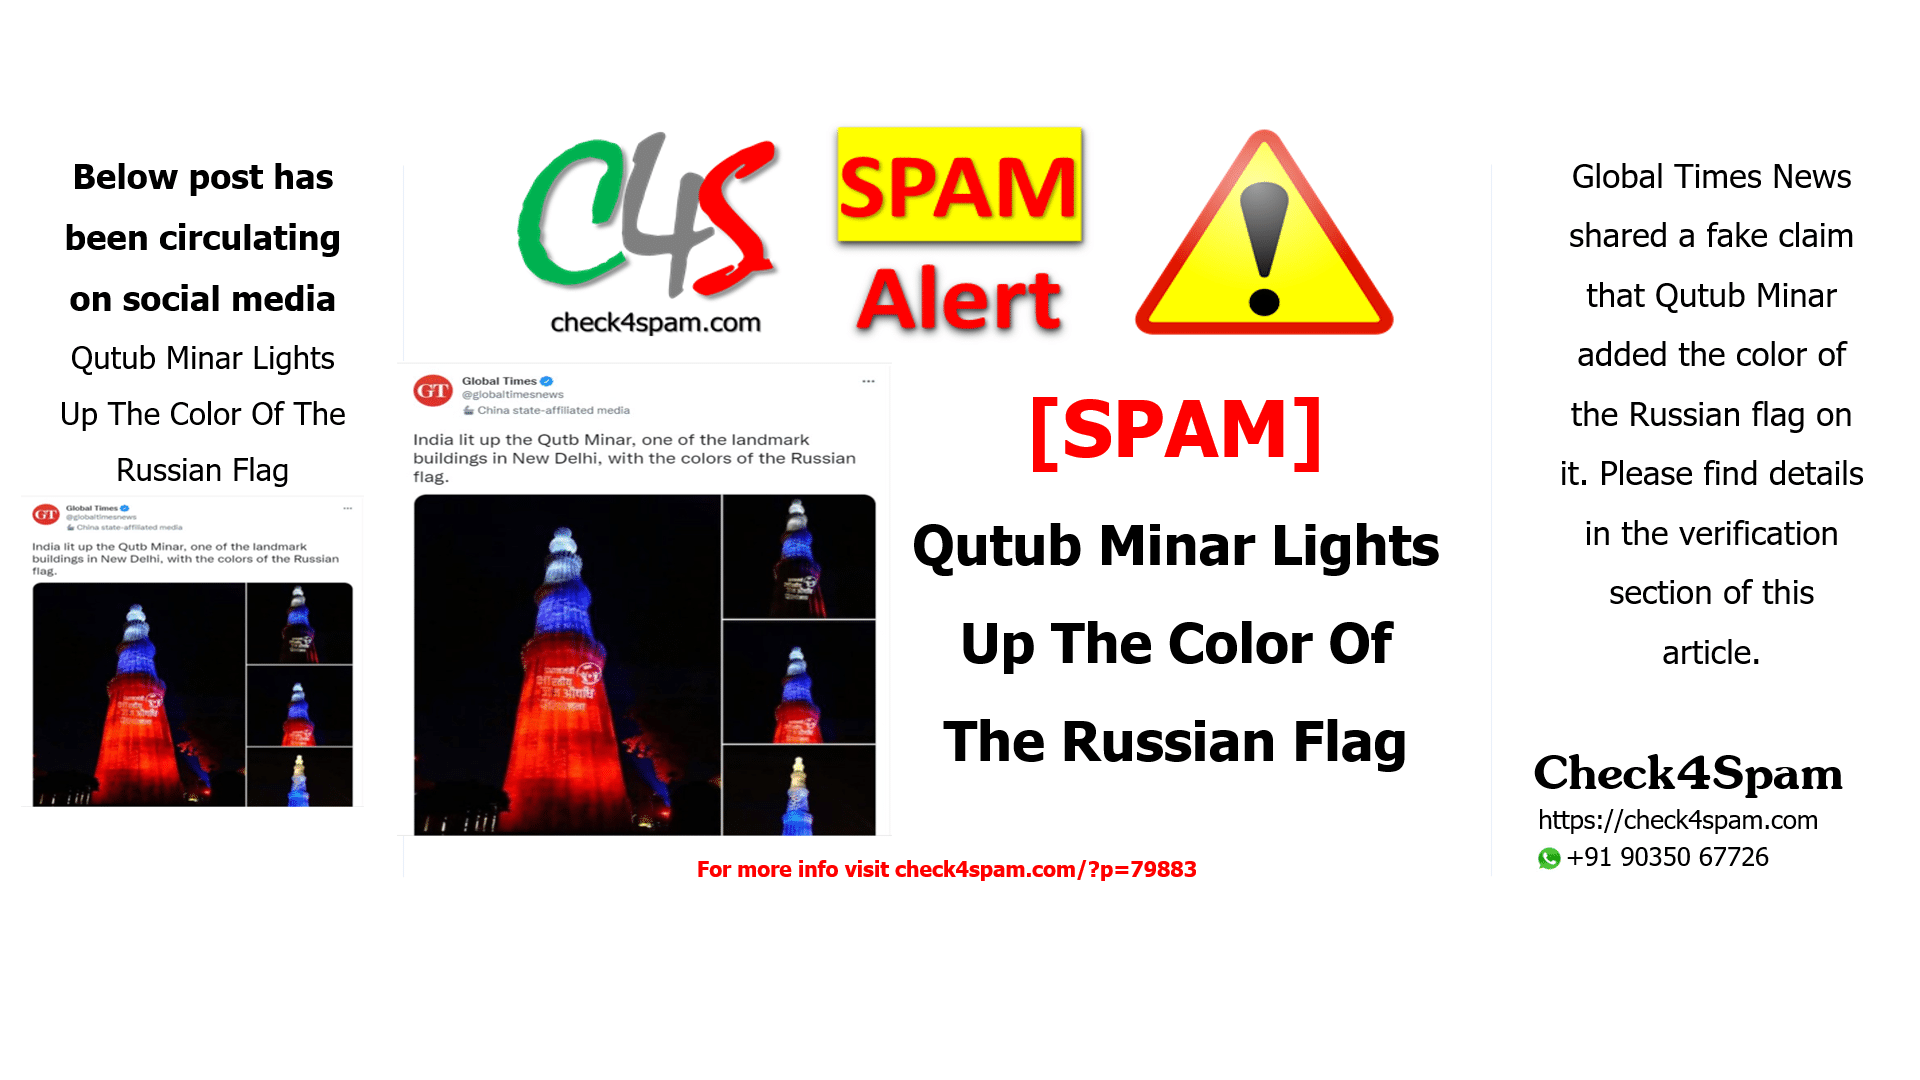 Qutub Minar Lights Up The Color Of The Russian Flag